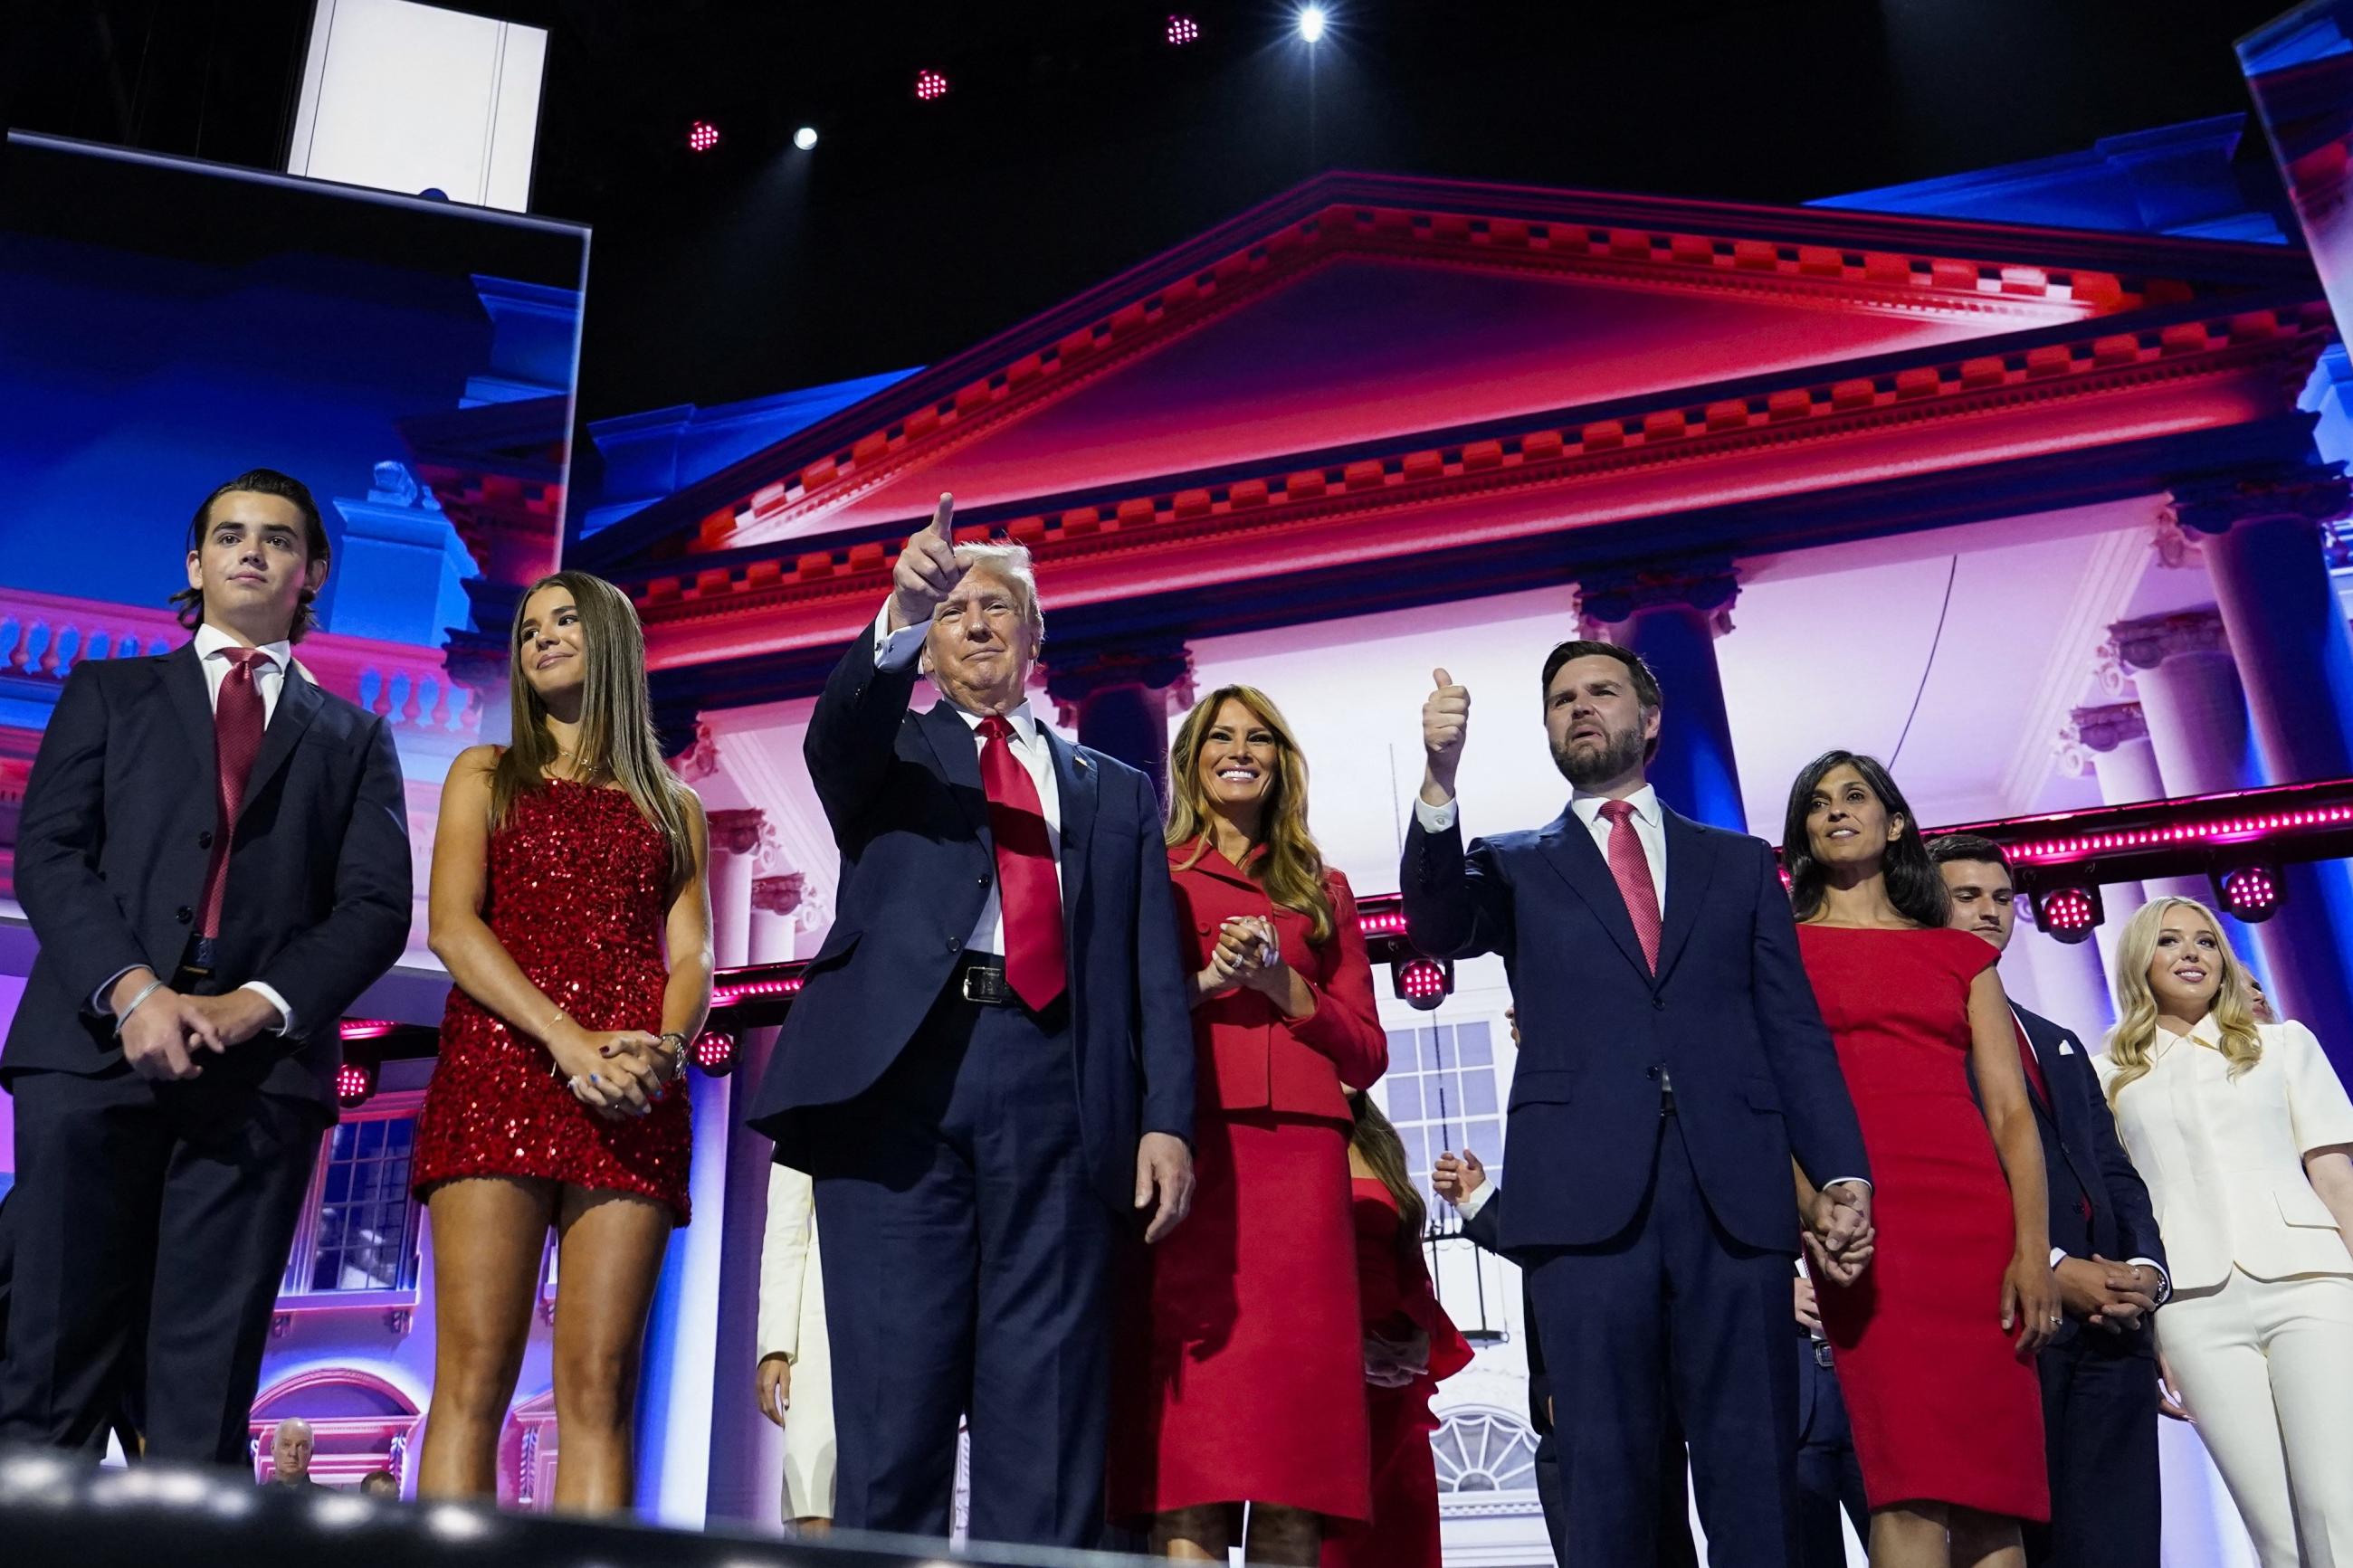 Republican presidential nominee and former President Donald Trump and Republican vice presidential nominee J.D. Vance stand on stage with their families.